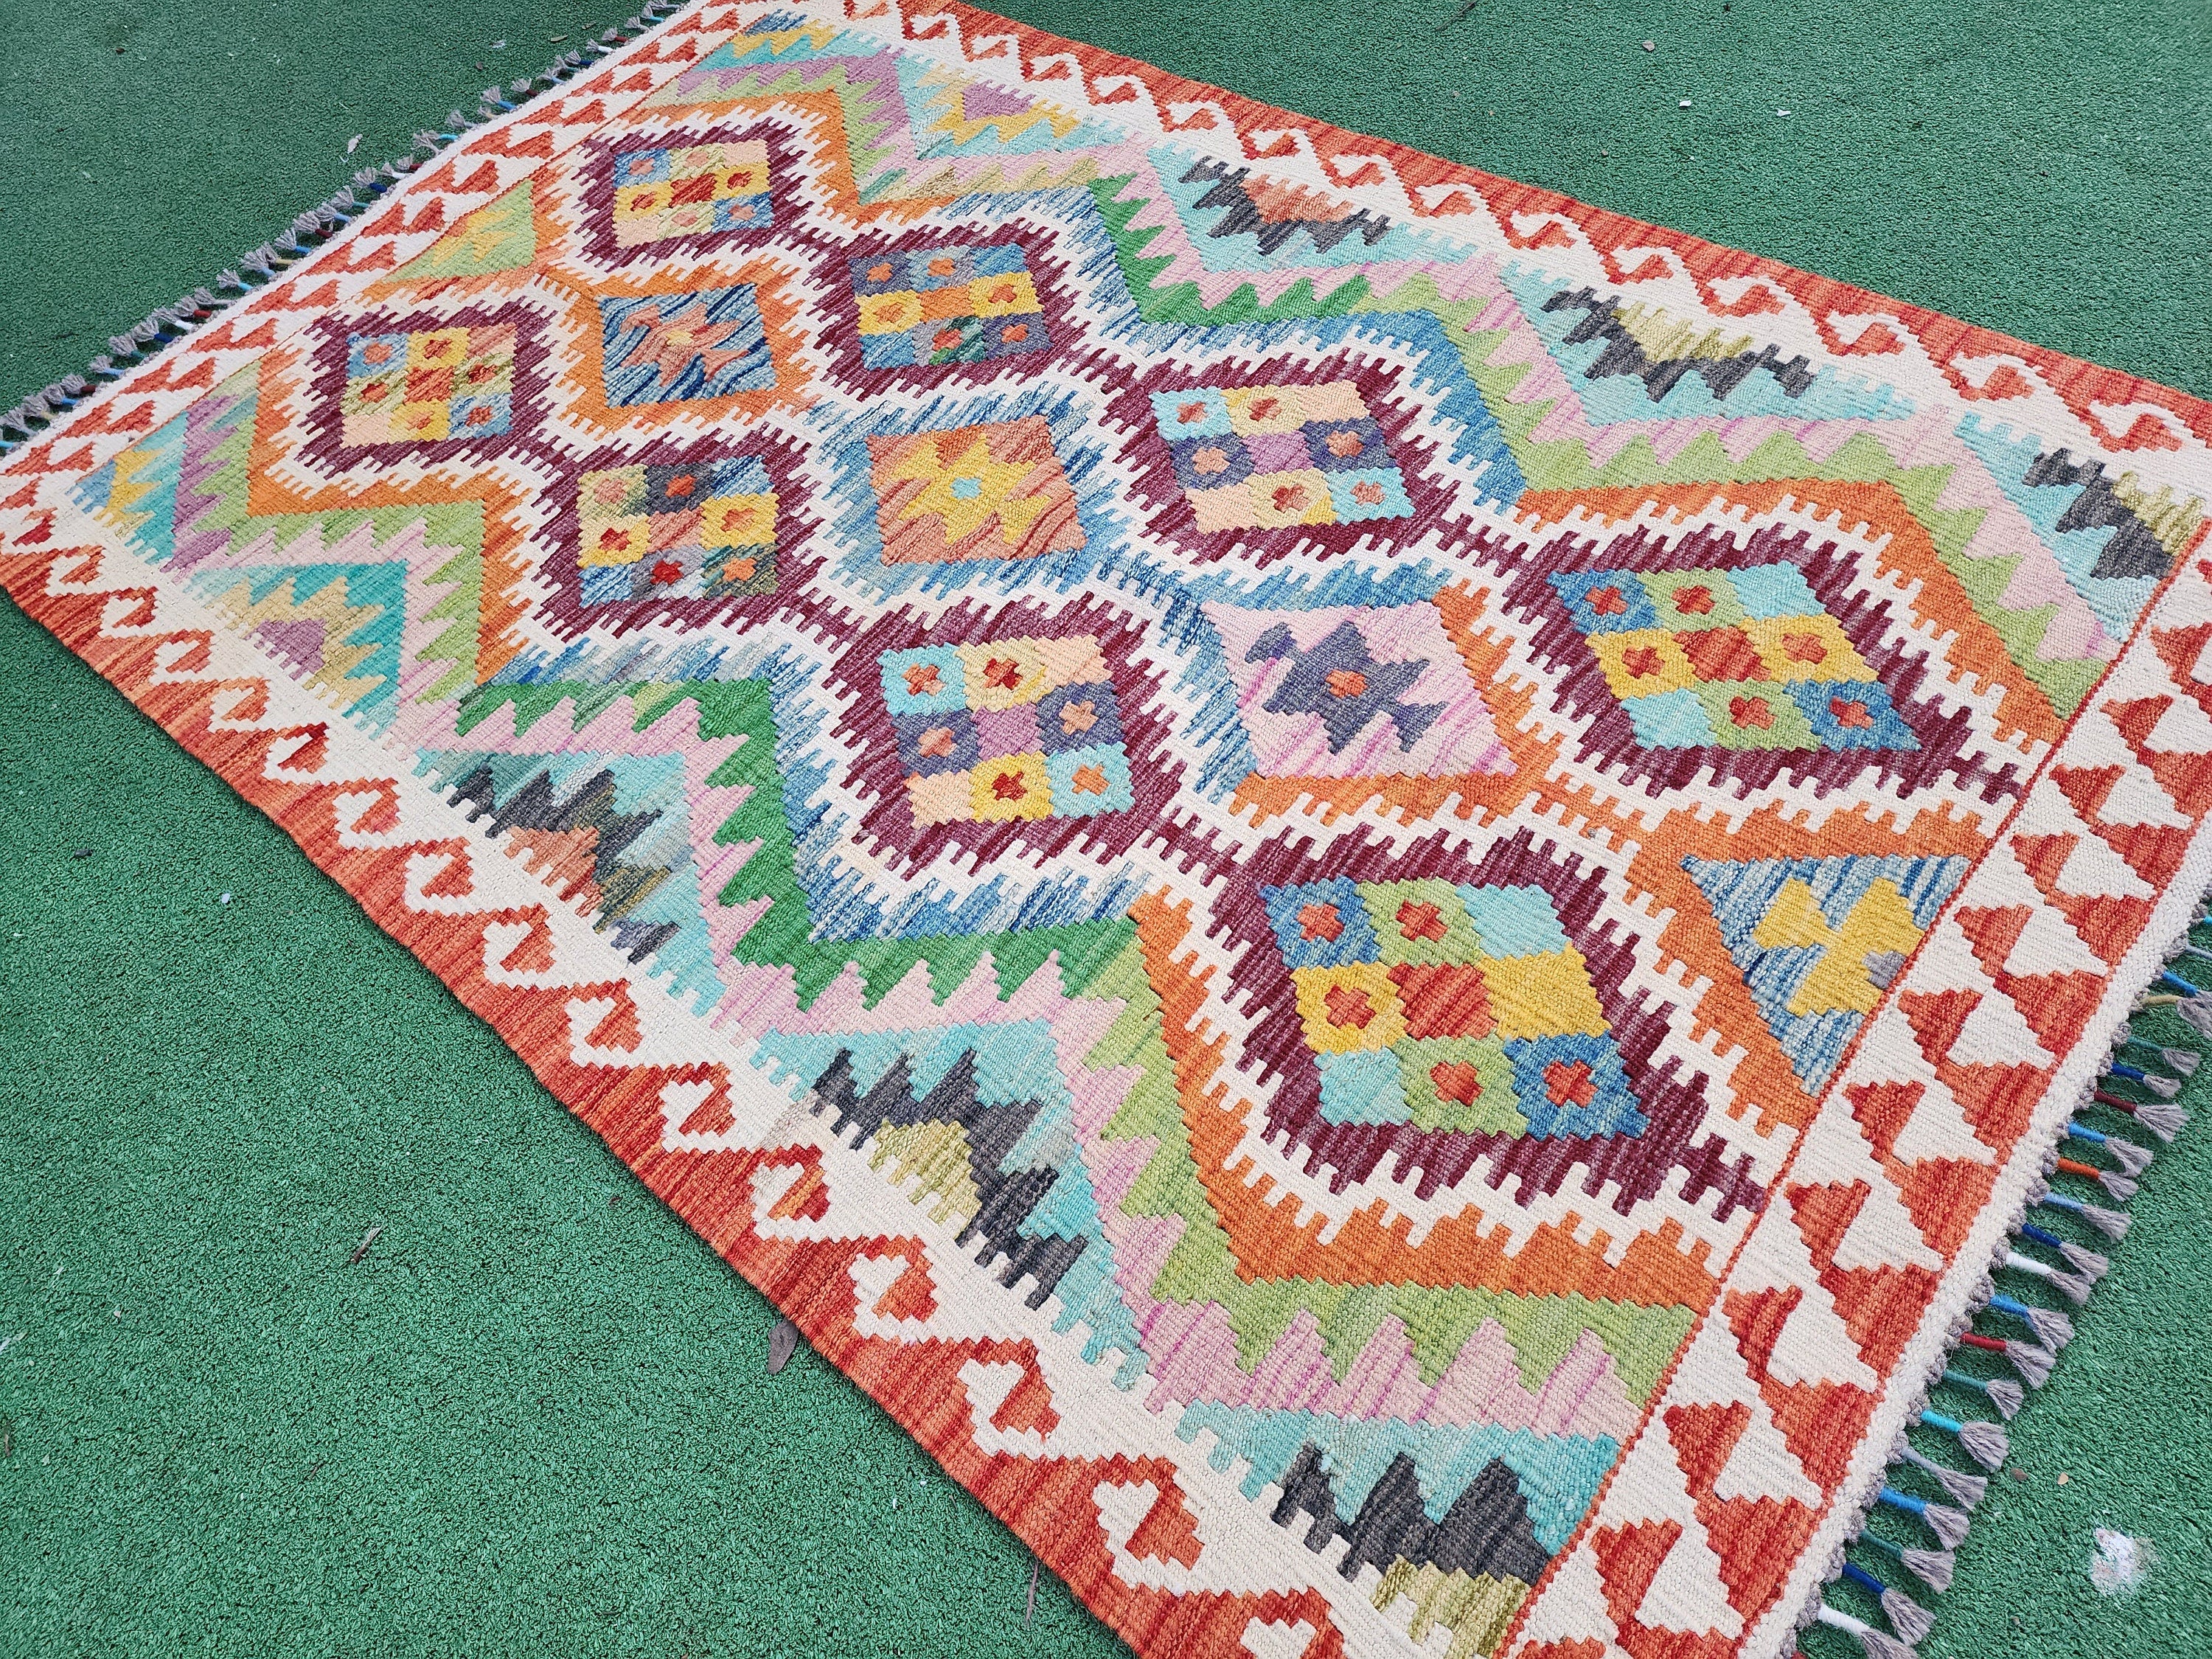 Afghan Kilim Rug, 5 x 3 ft Rust Red, Green Blue and Off White Contemporary Rug